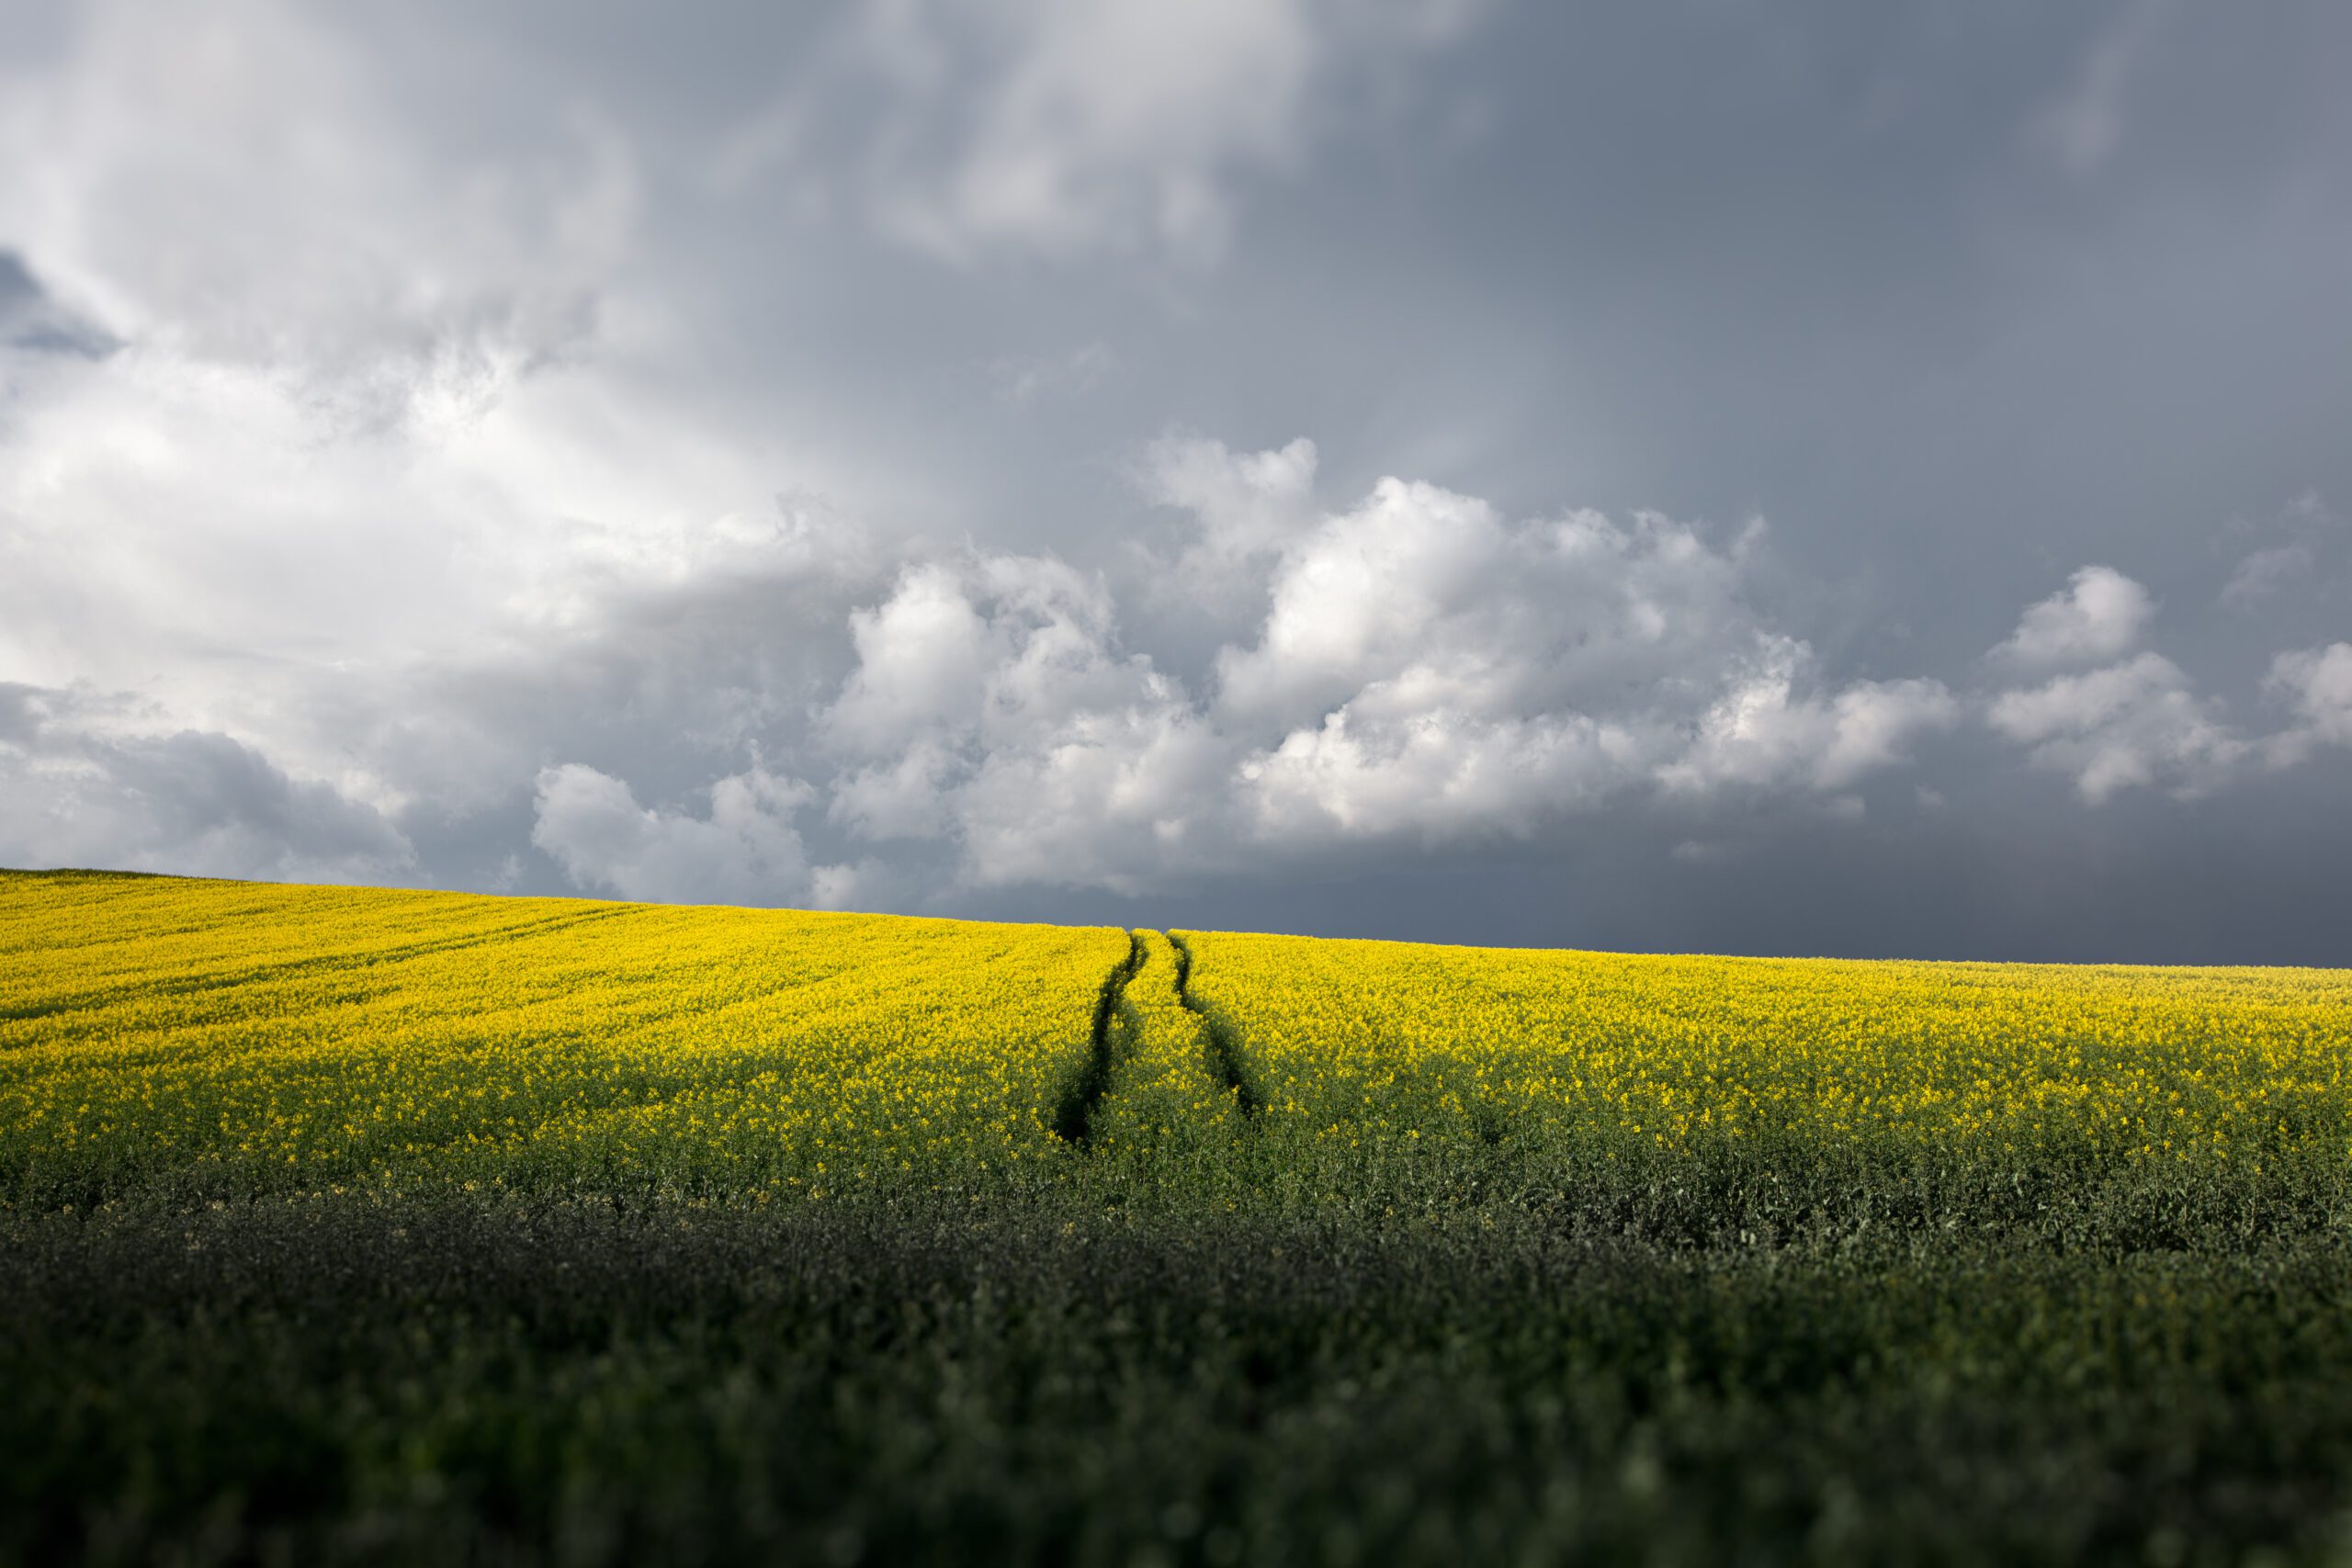 Immerse yourself in the striking contrast of a stormy summer day meeting a golden rapeseed field, captured in Southern Czechia.